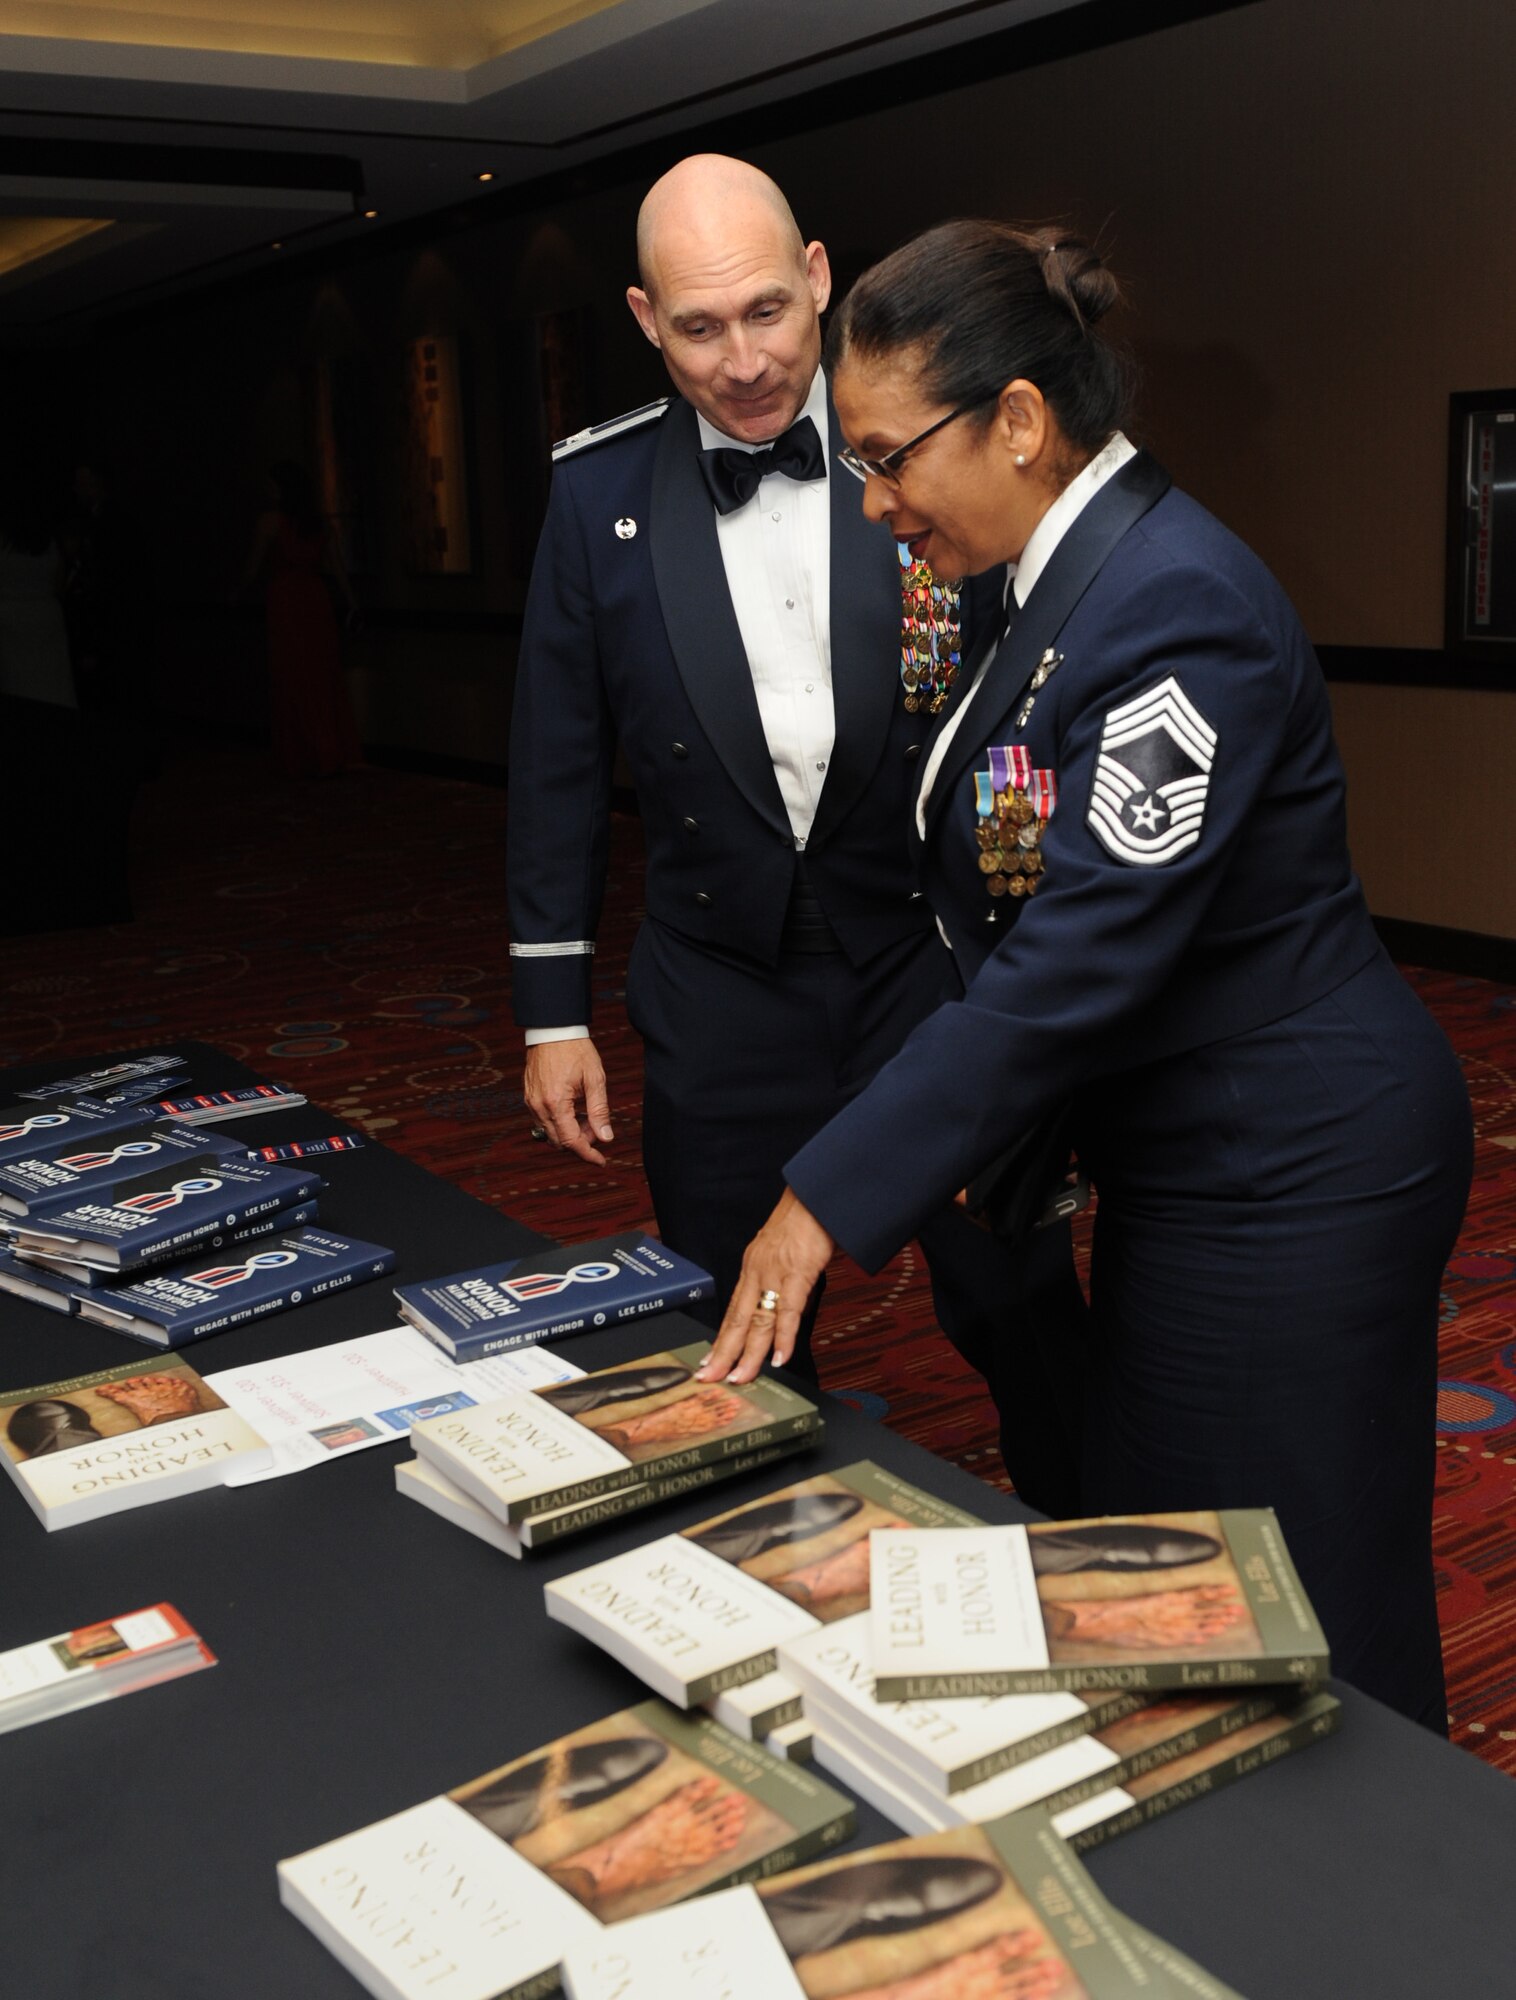 Col. Michael Manion, 403rd Wing commander, and Chief Master Sgt. Jo Keller, 403rd Aeromedical Staging Squadron enlisted manager chief, look at books on display written by the guest speaker, retired Col. Leon Ellis, during the Keesler Air Force Ball at the Imperial Palace Casino Sept. 24, 2016, Biloxi, Miss. The event was sponsored by the Air Force Association John C. Stennis Chapter #332 to celebrate the Air Force’s 69th birthday and the base’s 75th anniversary. (U.S. Air Force photo by Kemberly Groue/Released)